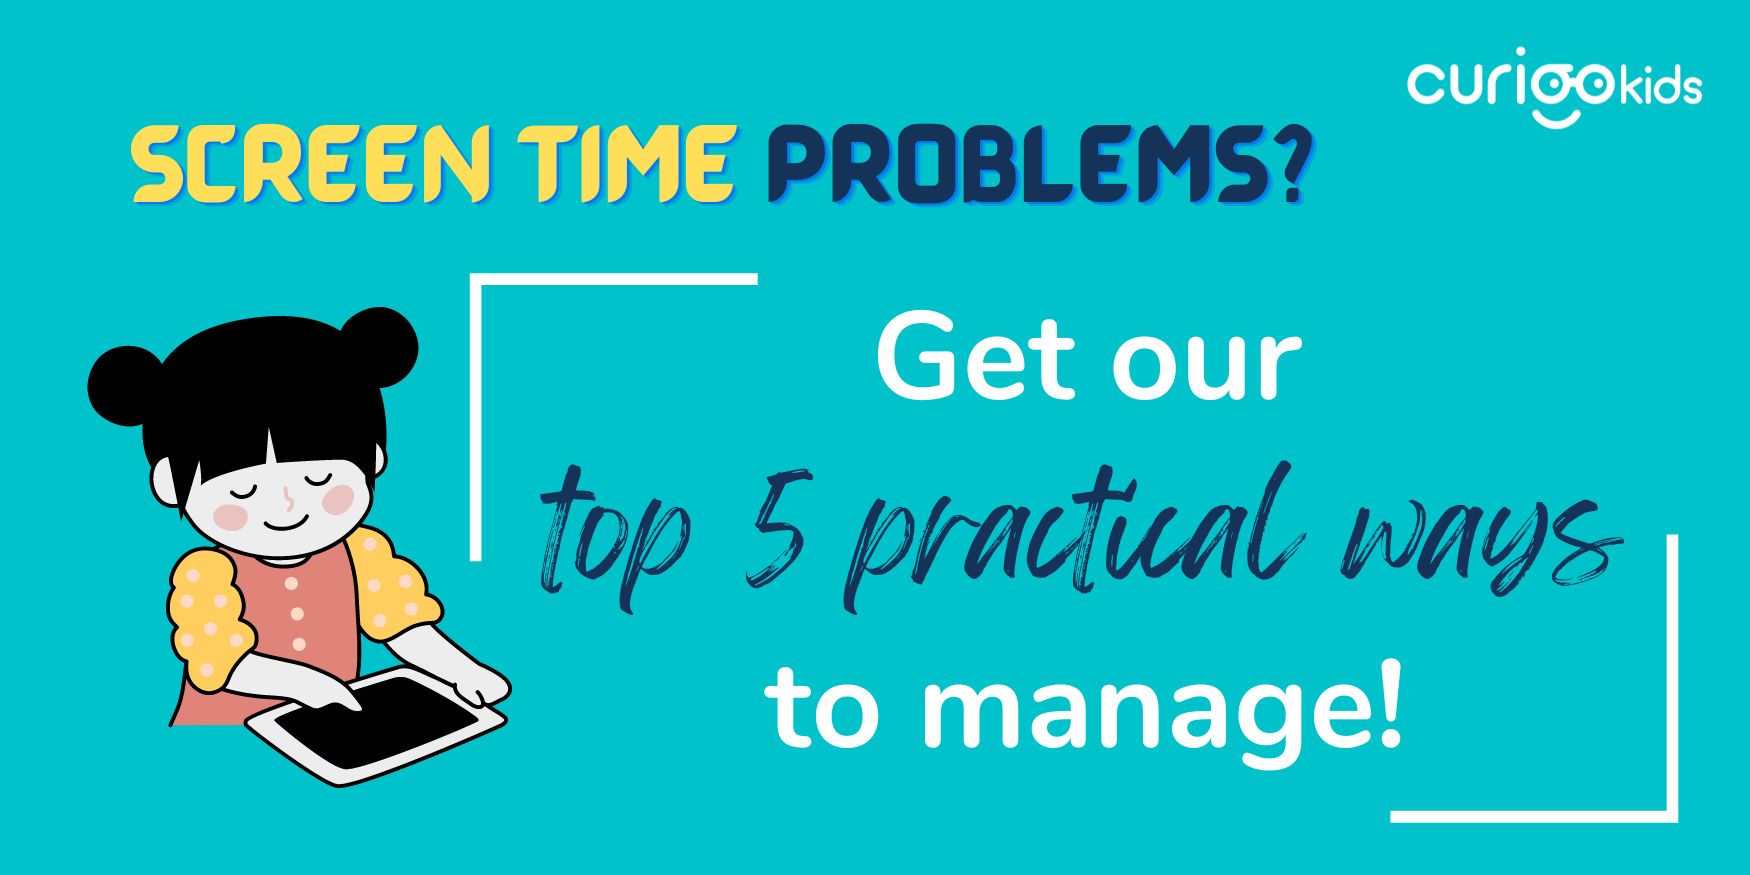 How to manage screen time problems blog post - Get our top 5 tips